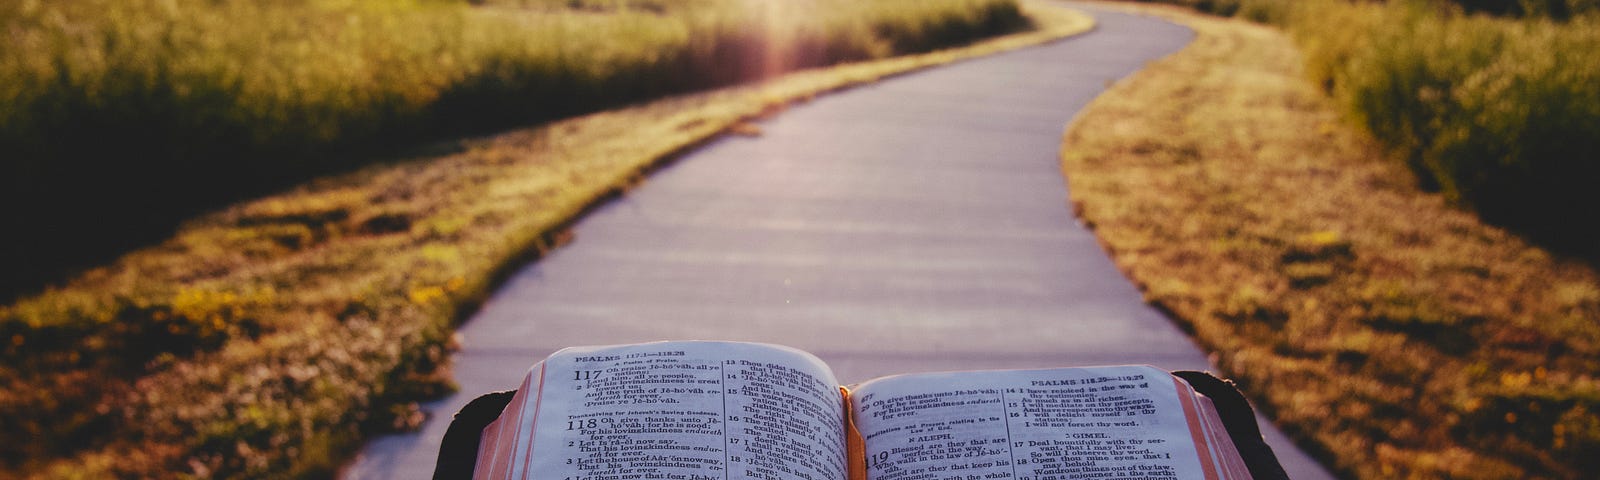 Man holding a Bible while standing still on a sidewalk